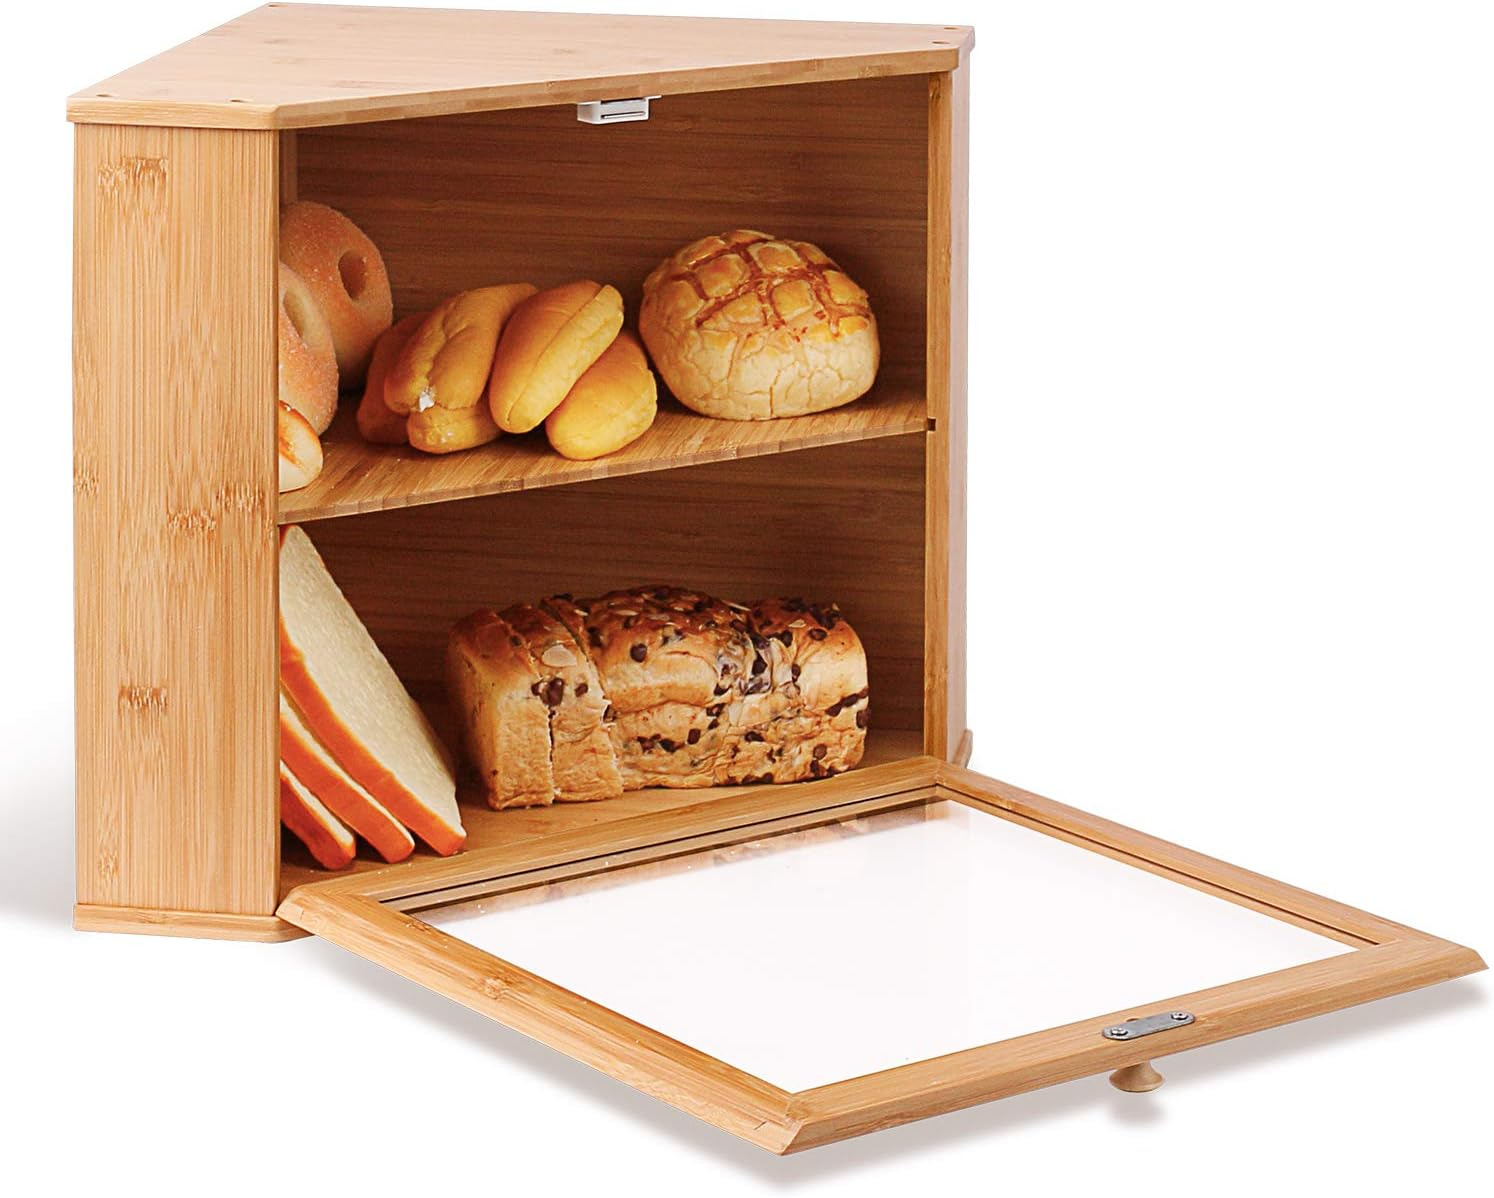 HOMEKOKO Double Layers Bamboo Corner Bread Box for Kitchen Counter, Wooden Large